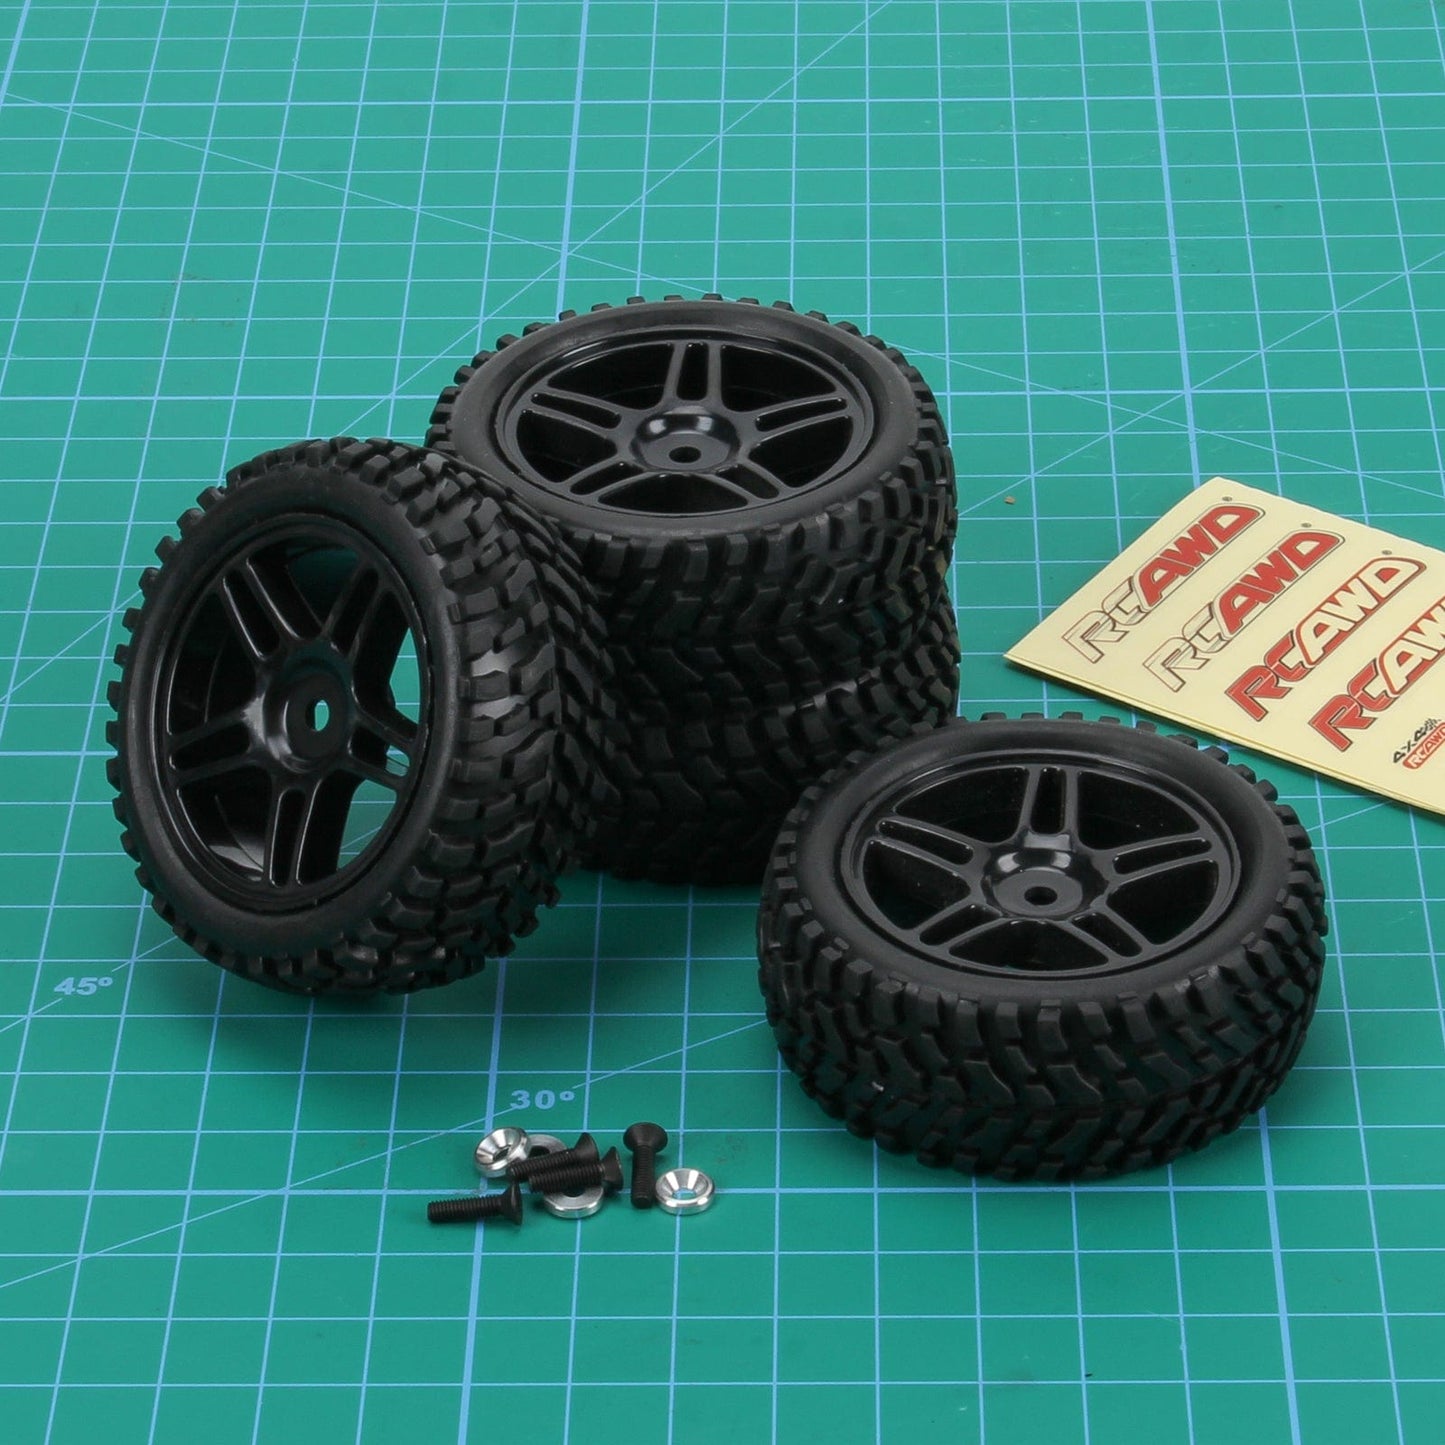 RCAWD Axial AXI31594 Black RCAWD Axial AXI31594 Upgrades Wheel Rim & Rubber Tire for 1/18 Yeti Jr Can-Am Maverick